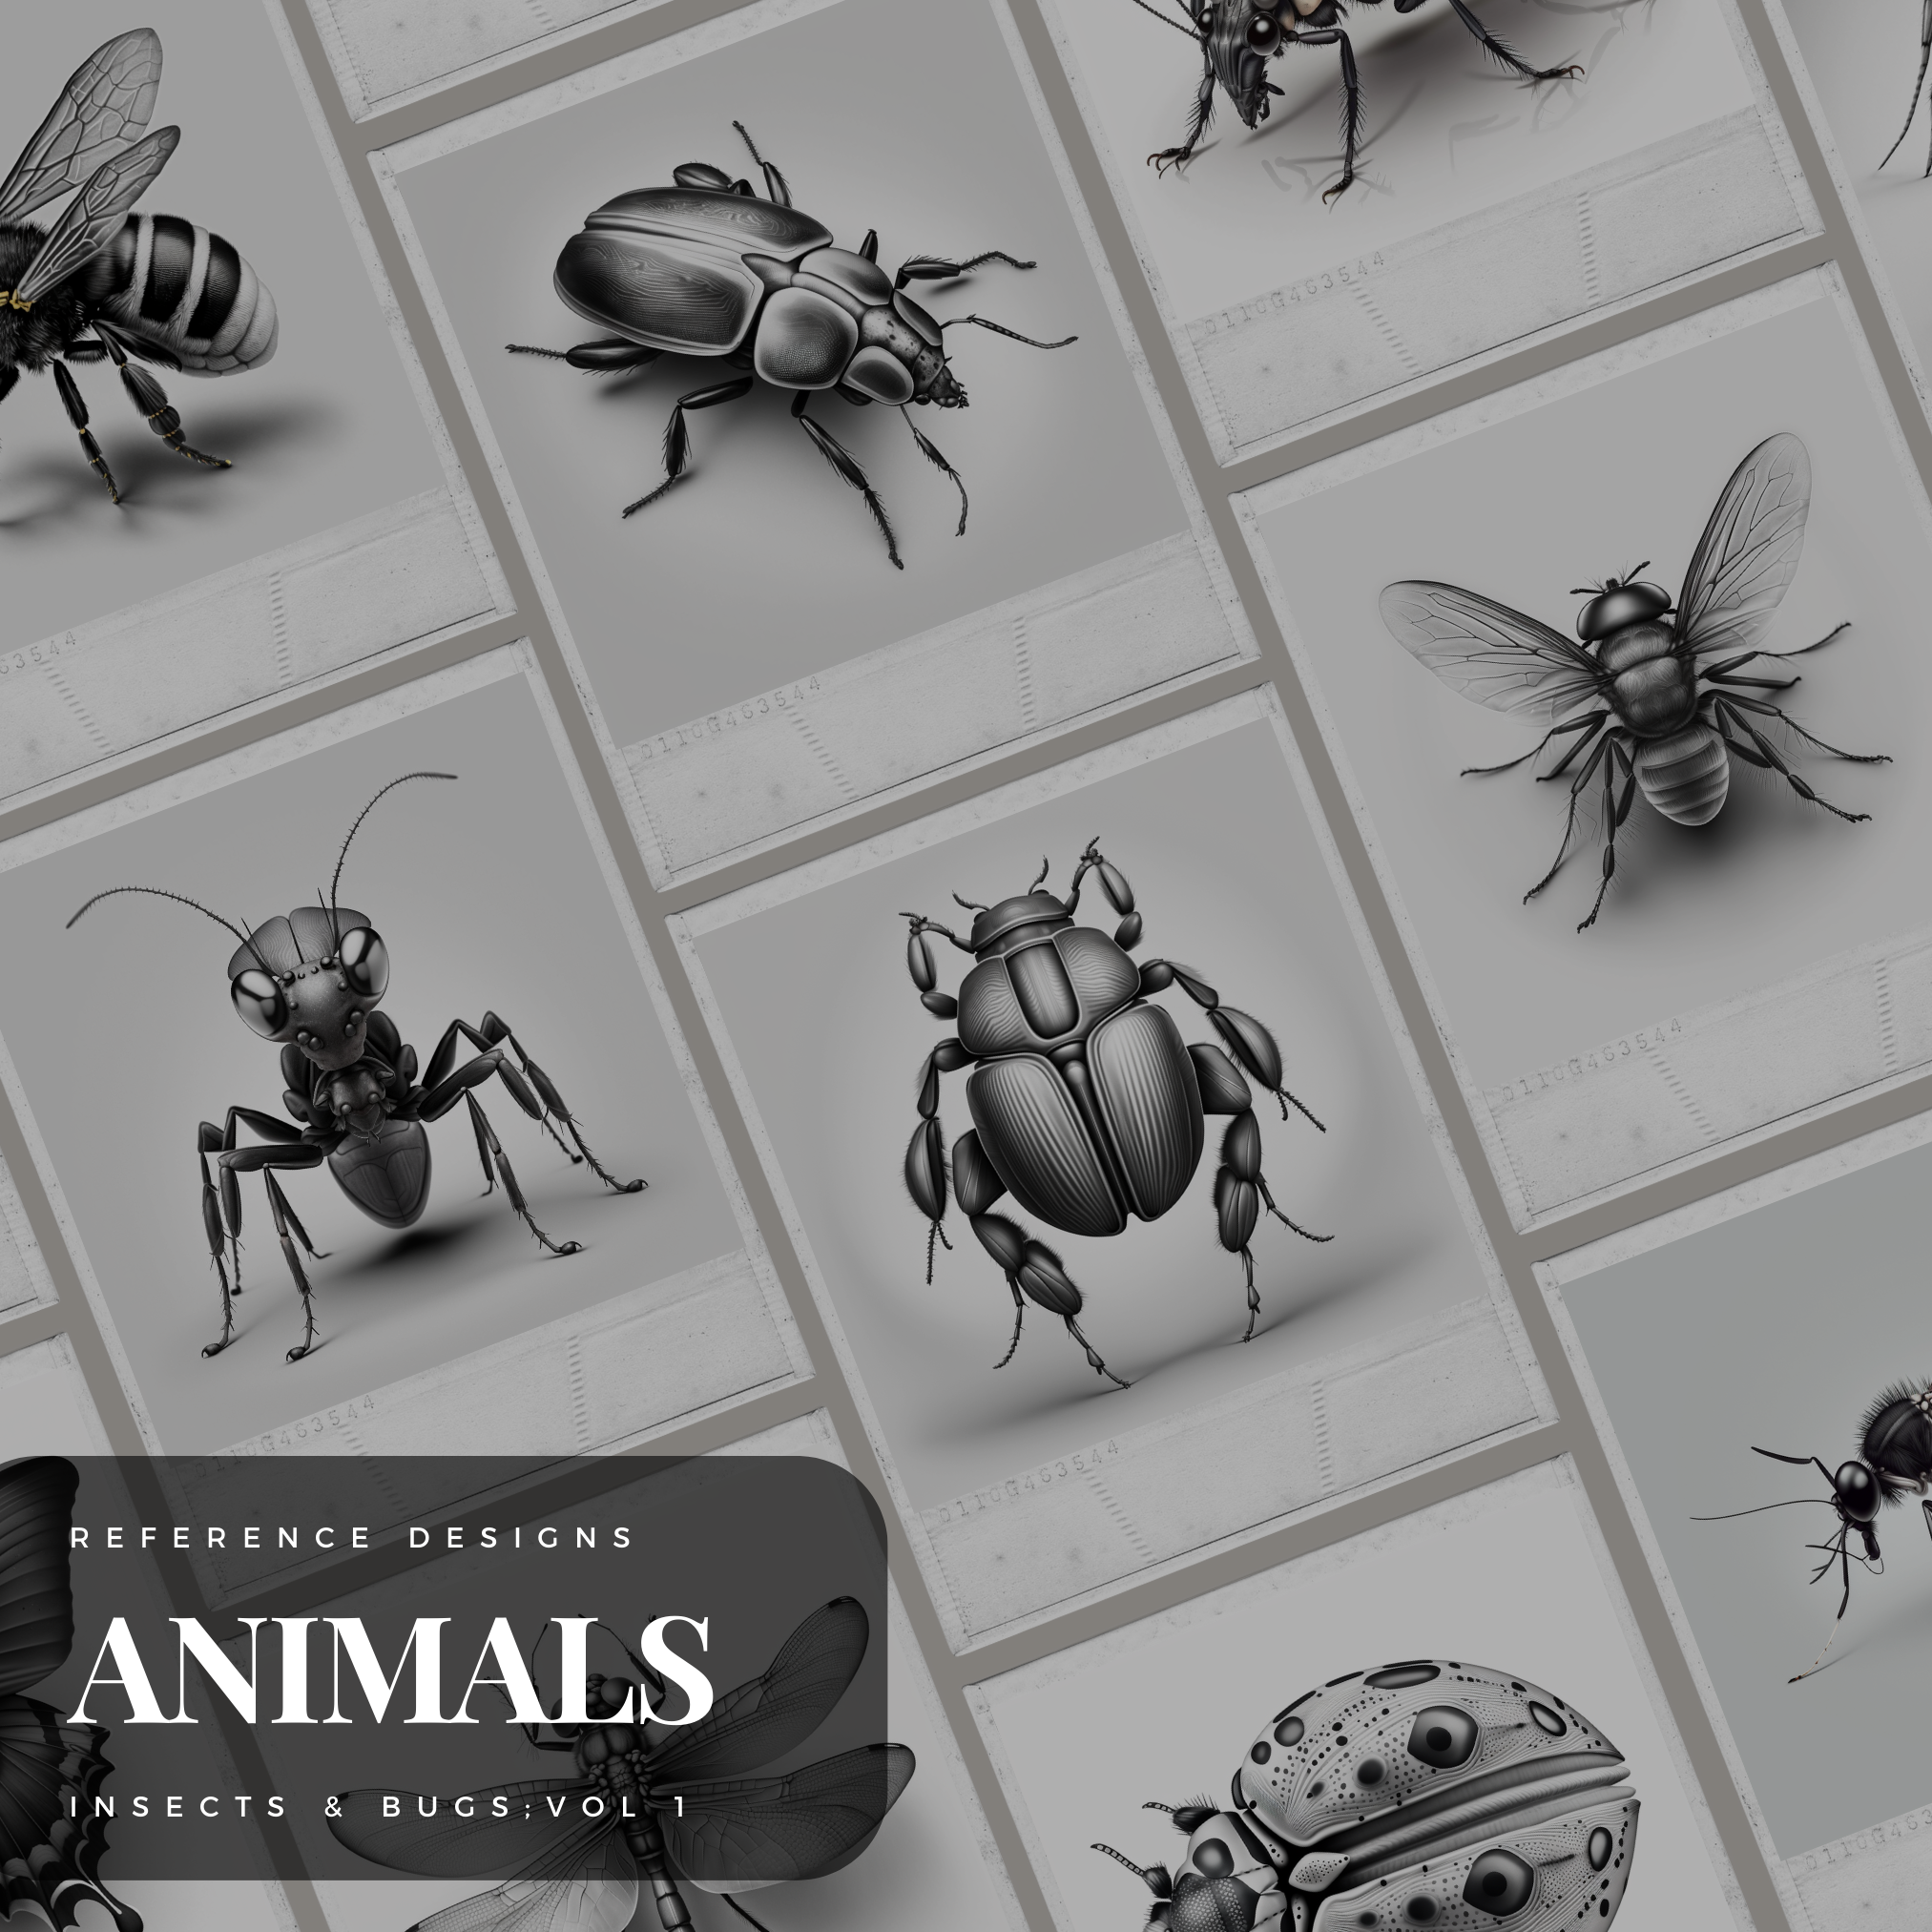 Insects & Bugs 'Volume 1' Digital Reference Design Collection: 100 Procreate & Sketchbook Images